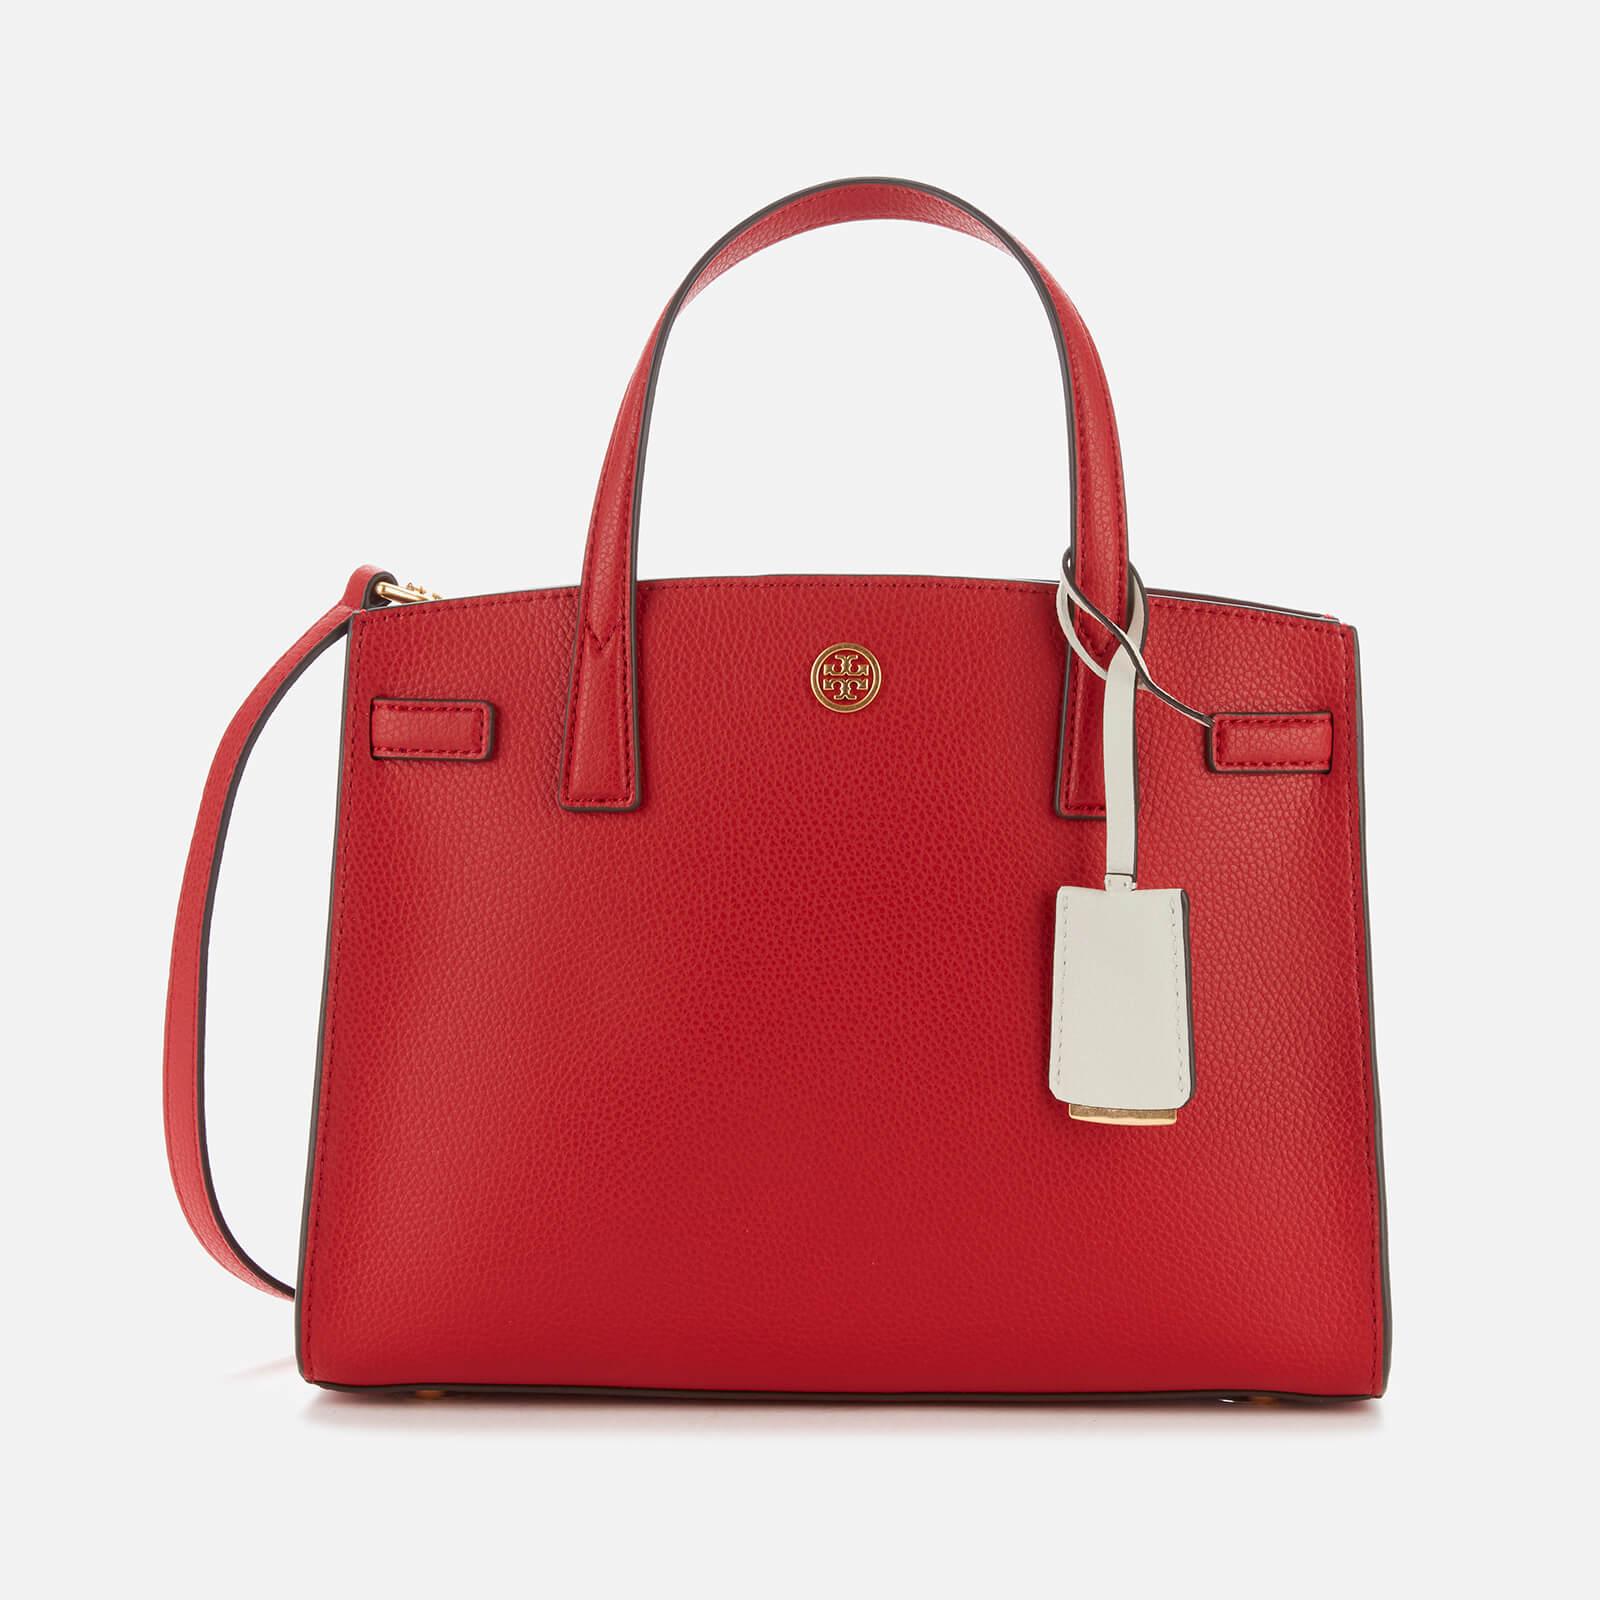 Tory Burch Leather Walker Small Satchel in Red - Lyst